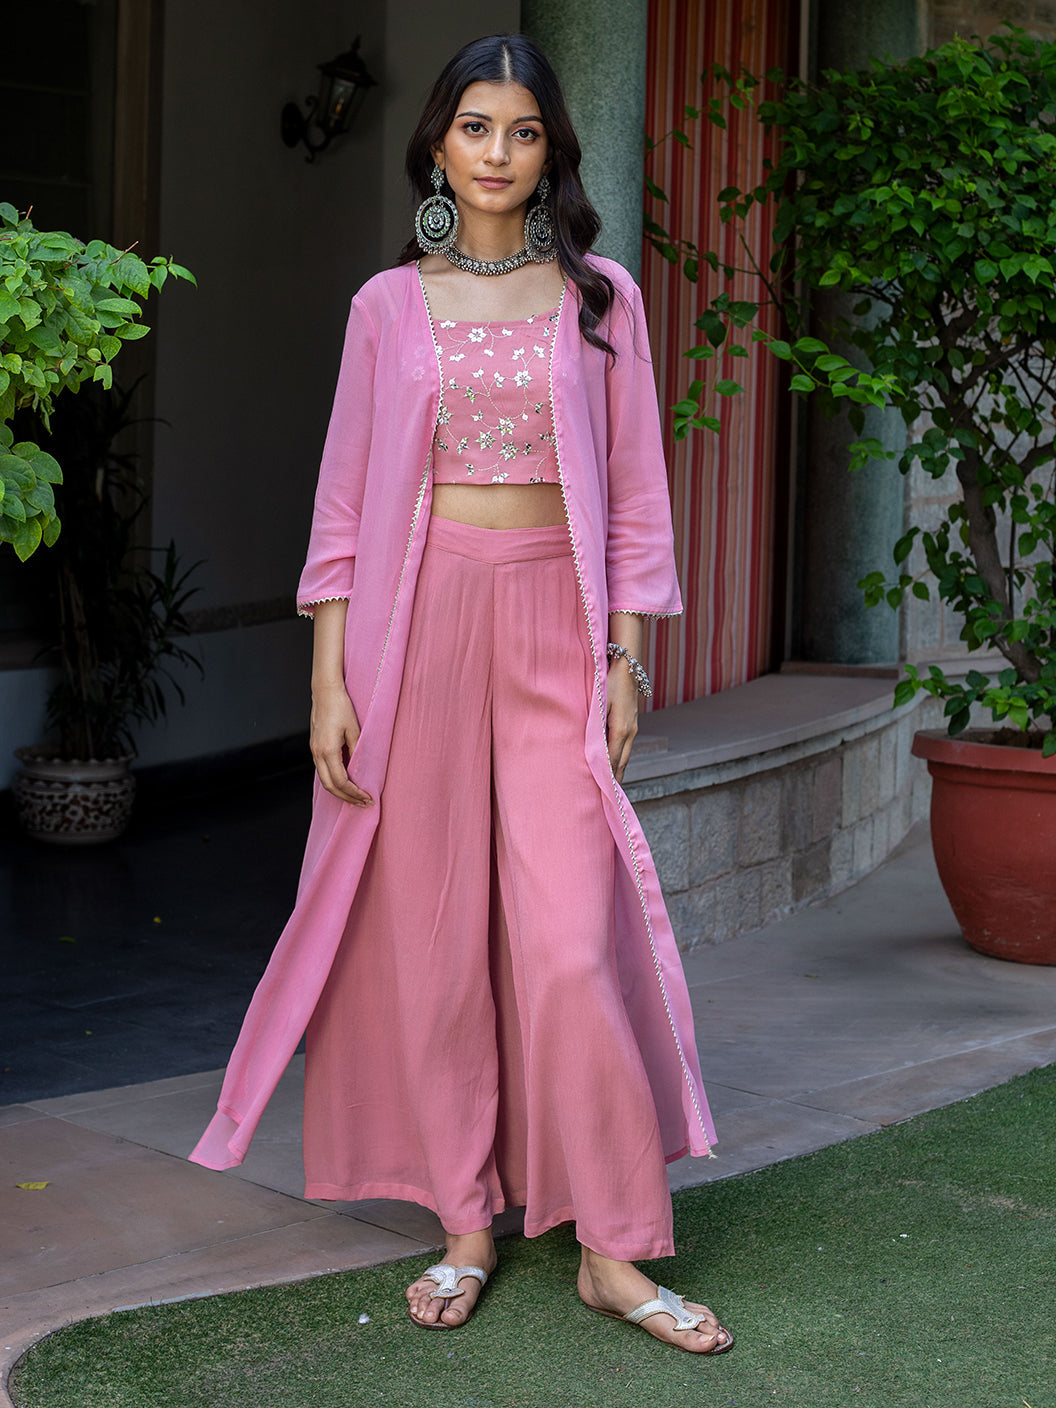 unveil-charm-in-our-pink-co-ord-set-featuring-an-embroidered-jaal-on-the-crop-top-effortless-elegance-and-style-perfect-for-a-fashionable-statement